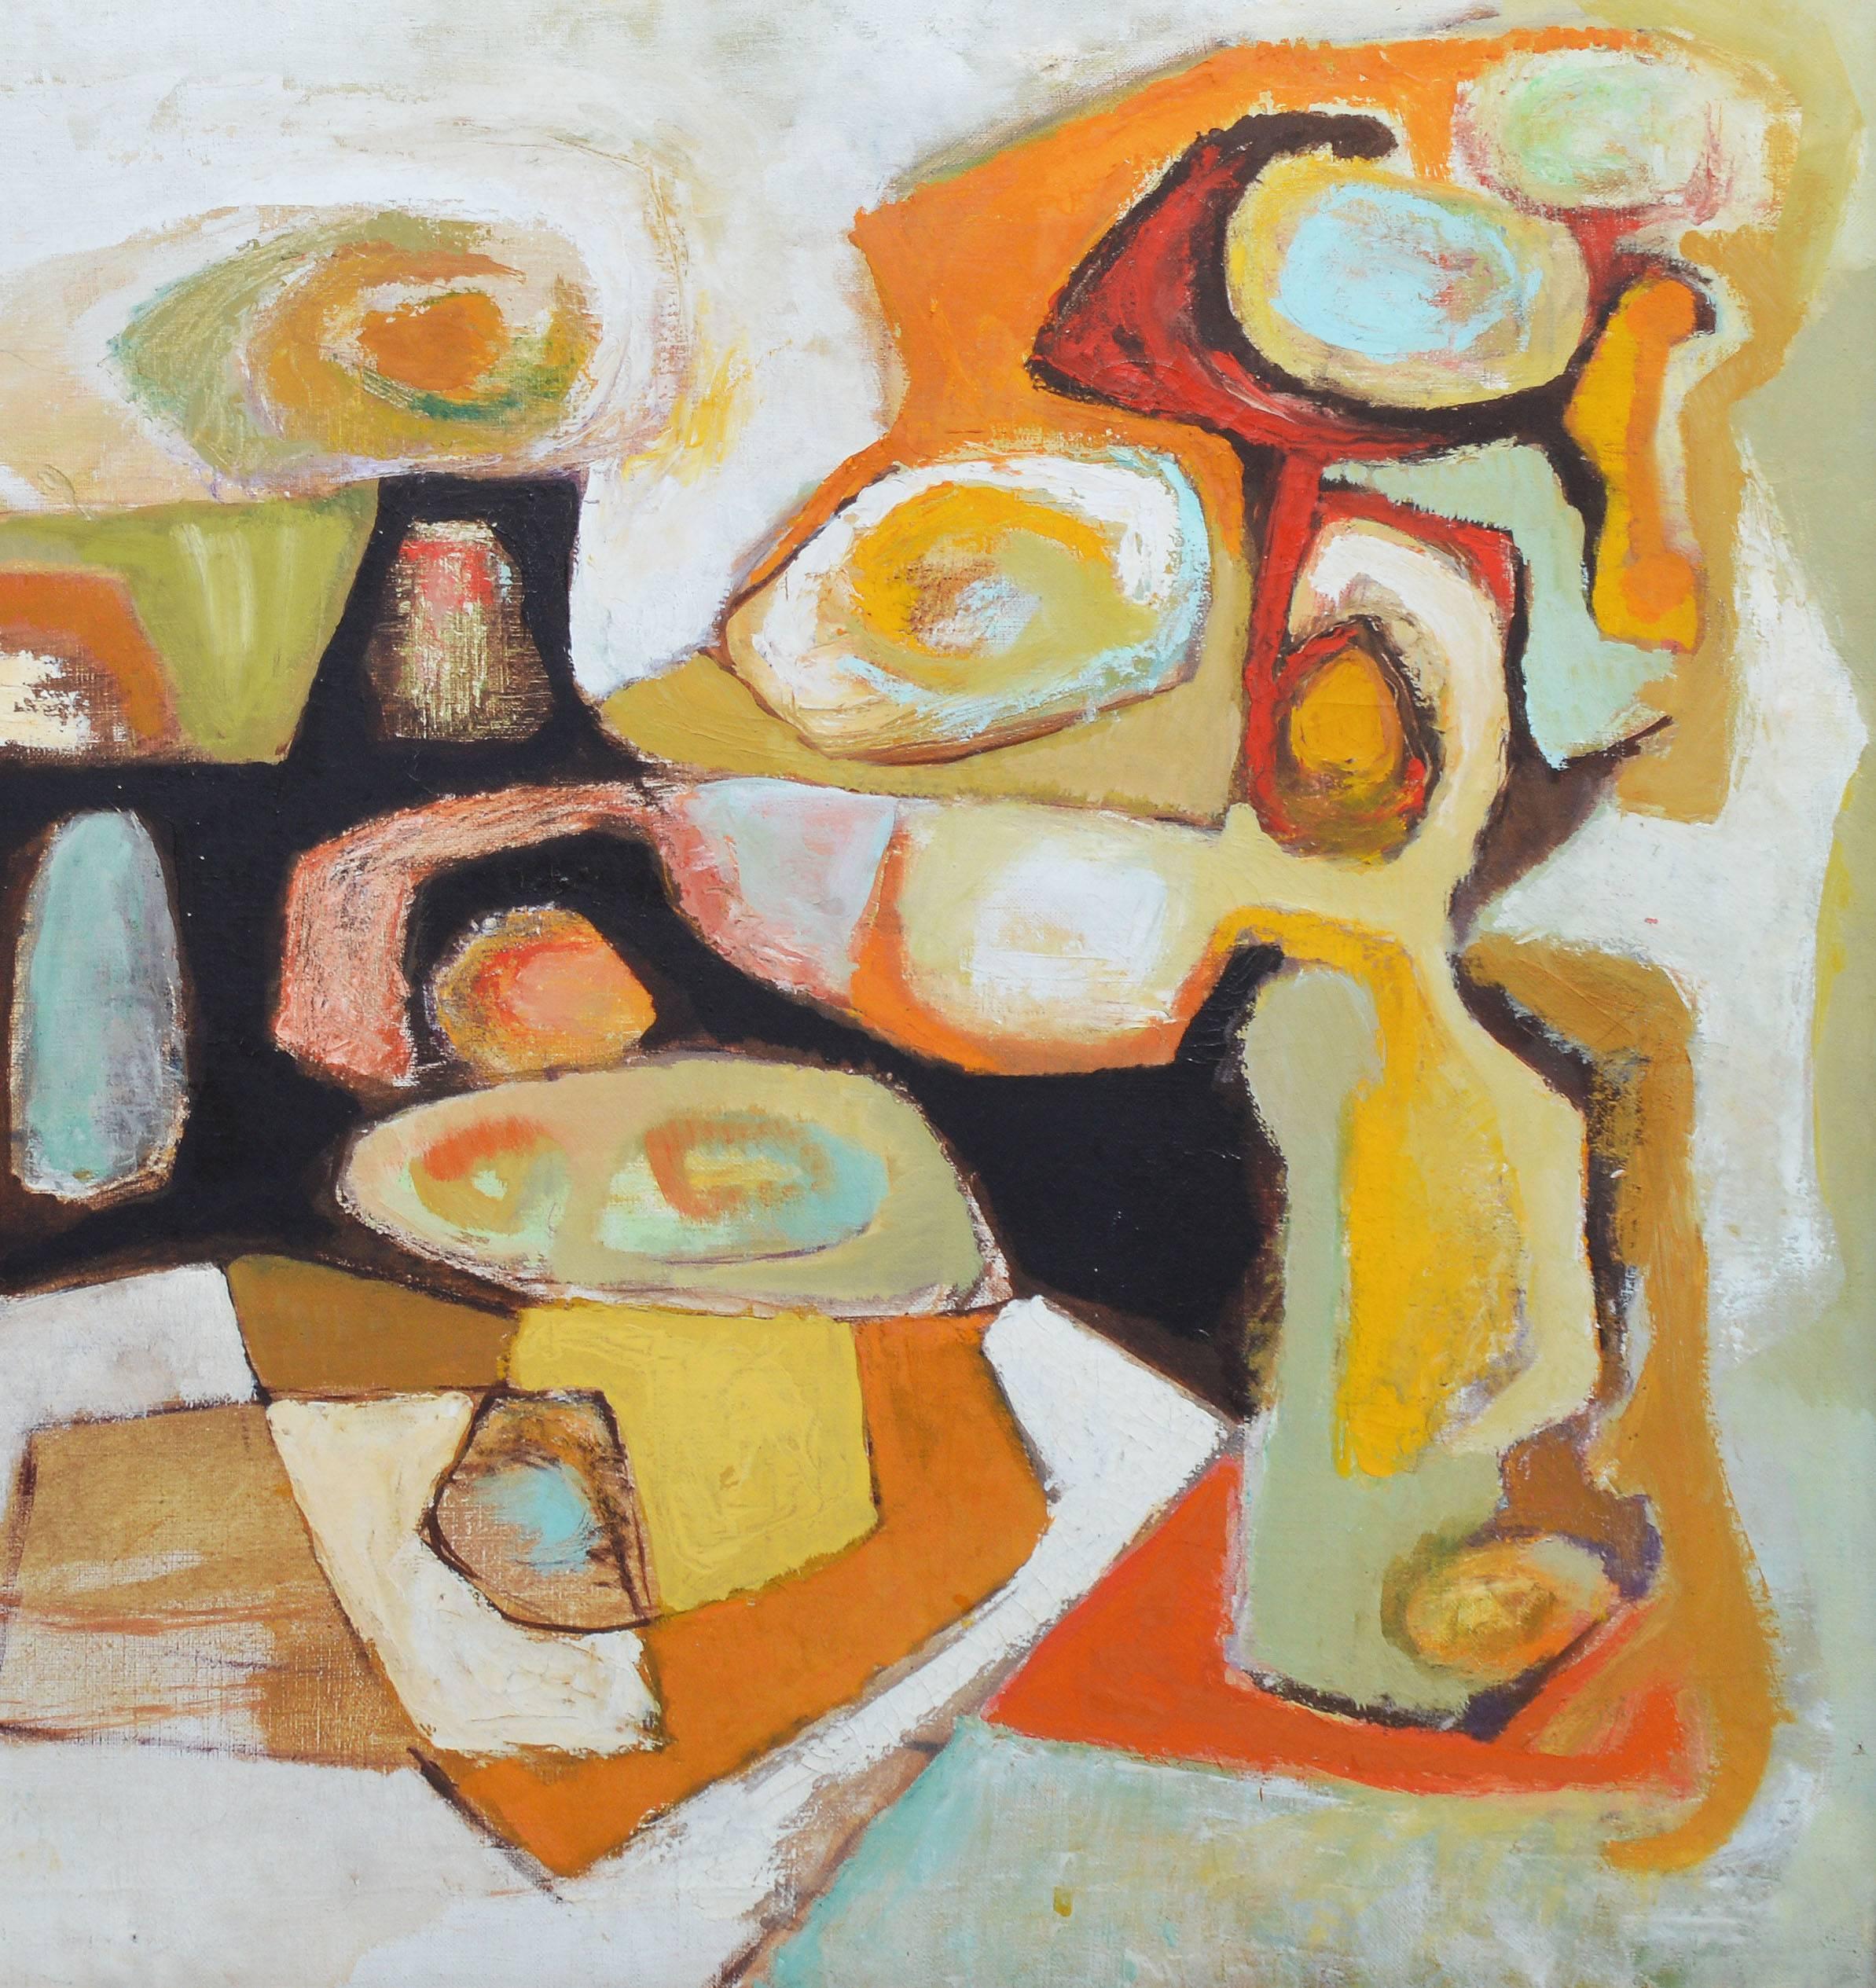 Mid century modernist abstract still life painting. Oil on canvas, circa 1950. Unsigned. Displayed in a brown wood frame. Image, 34"L x 24"H, overall 41"L x 31"H.
